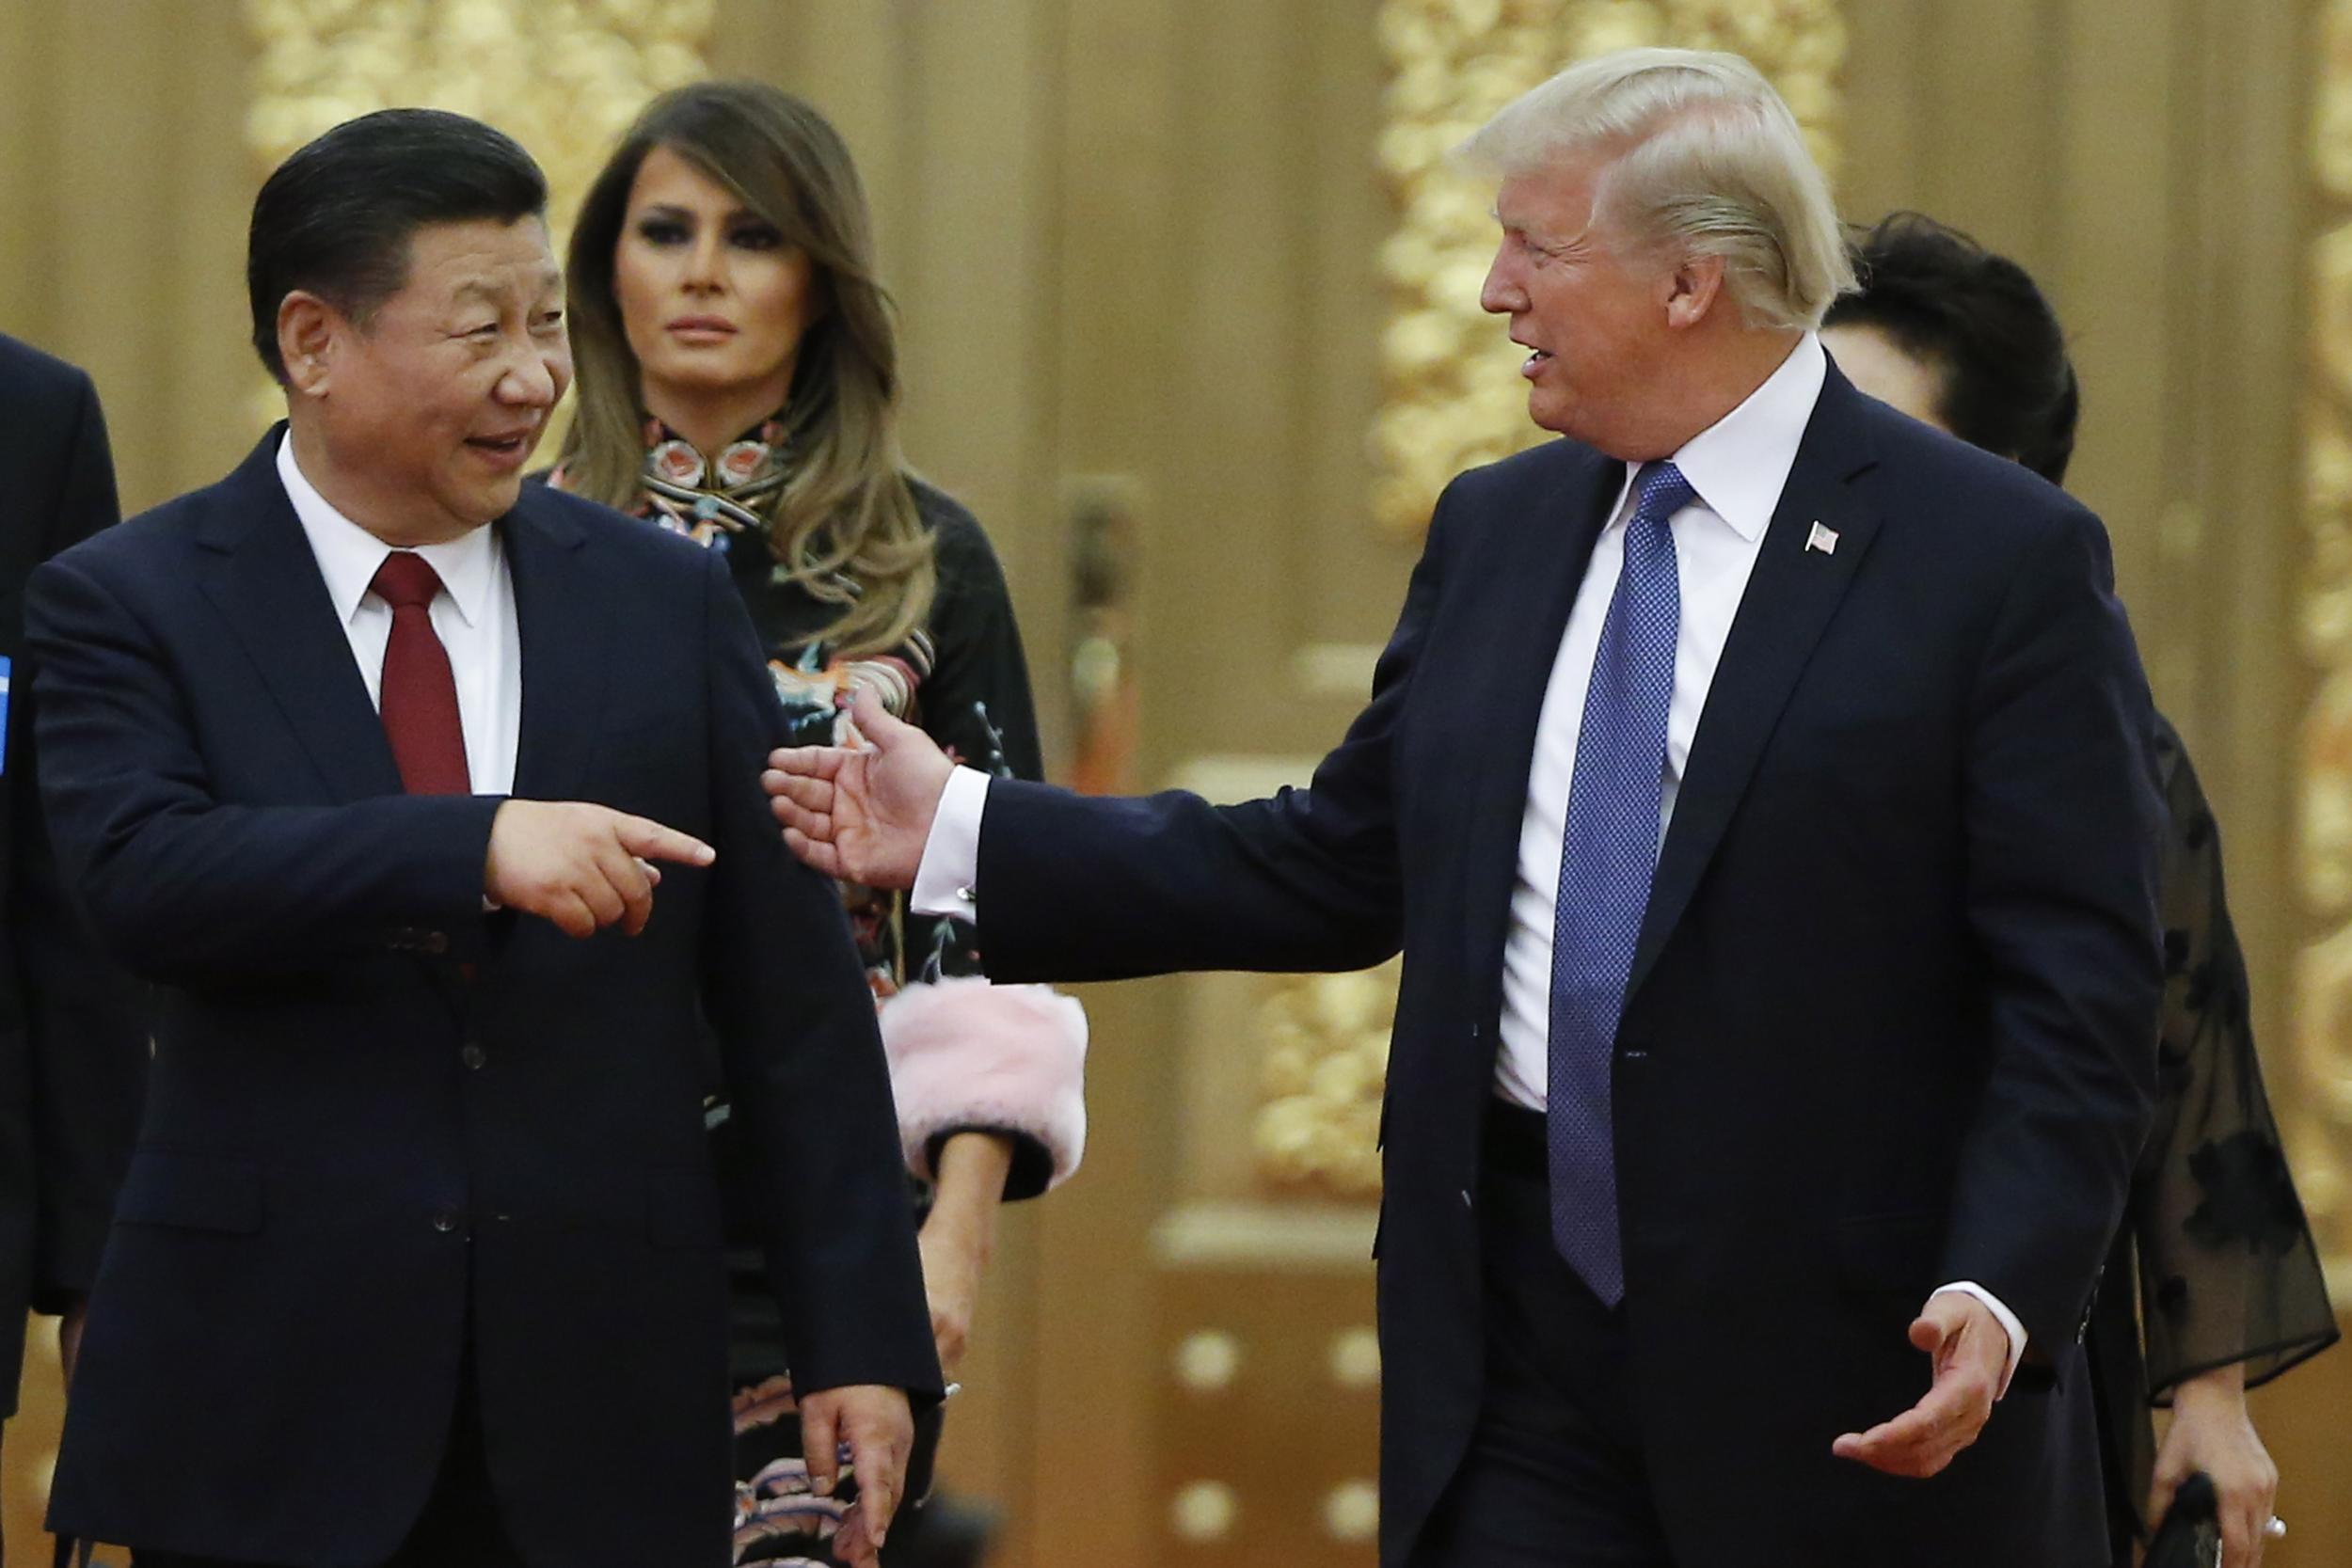 File image: Analysis of Trump's tax records reveal attempts at getting business deals in China and a 'secret' bank account